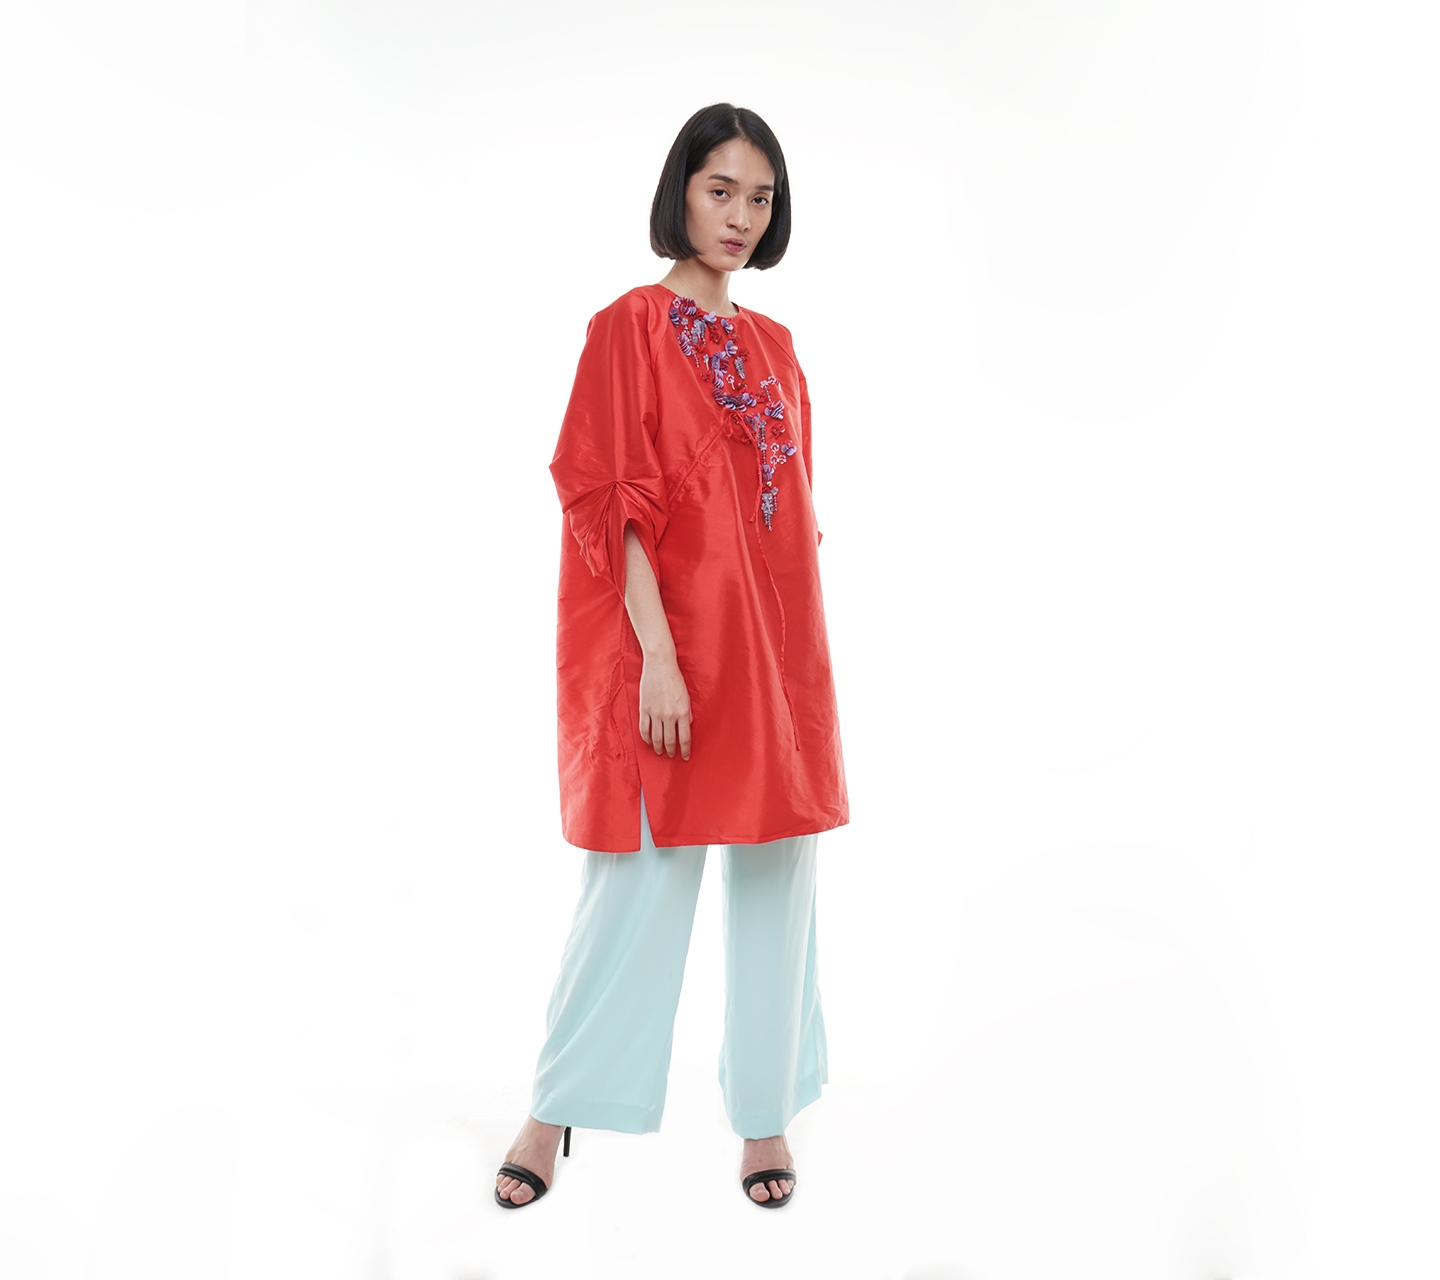 Sebe11as Red with Gathered and Beads Blouse